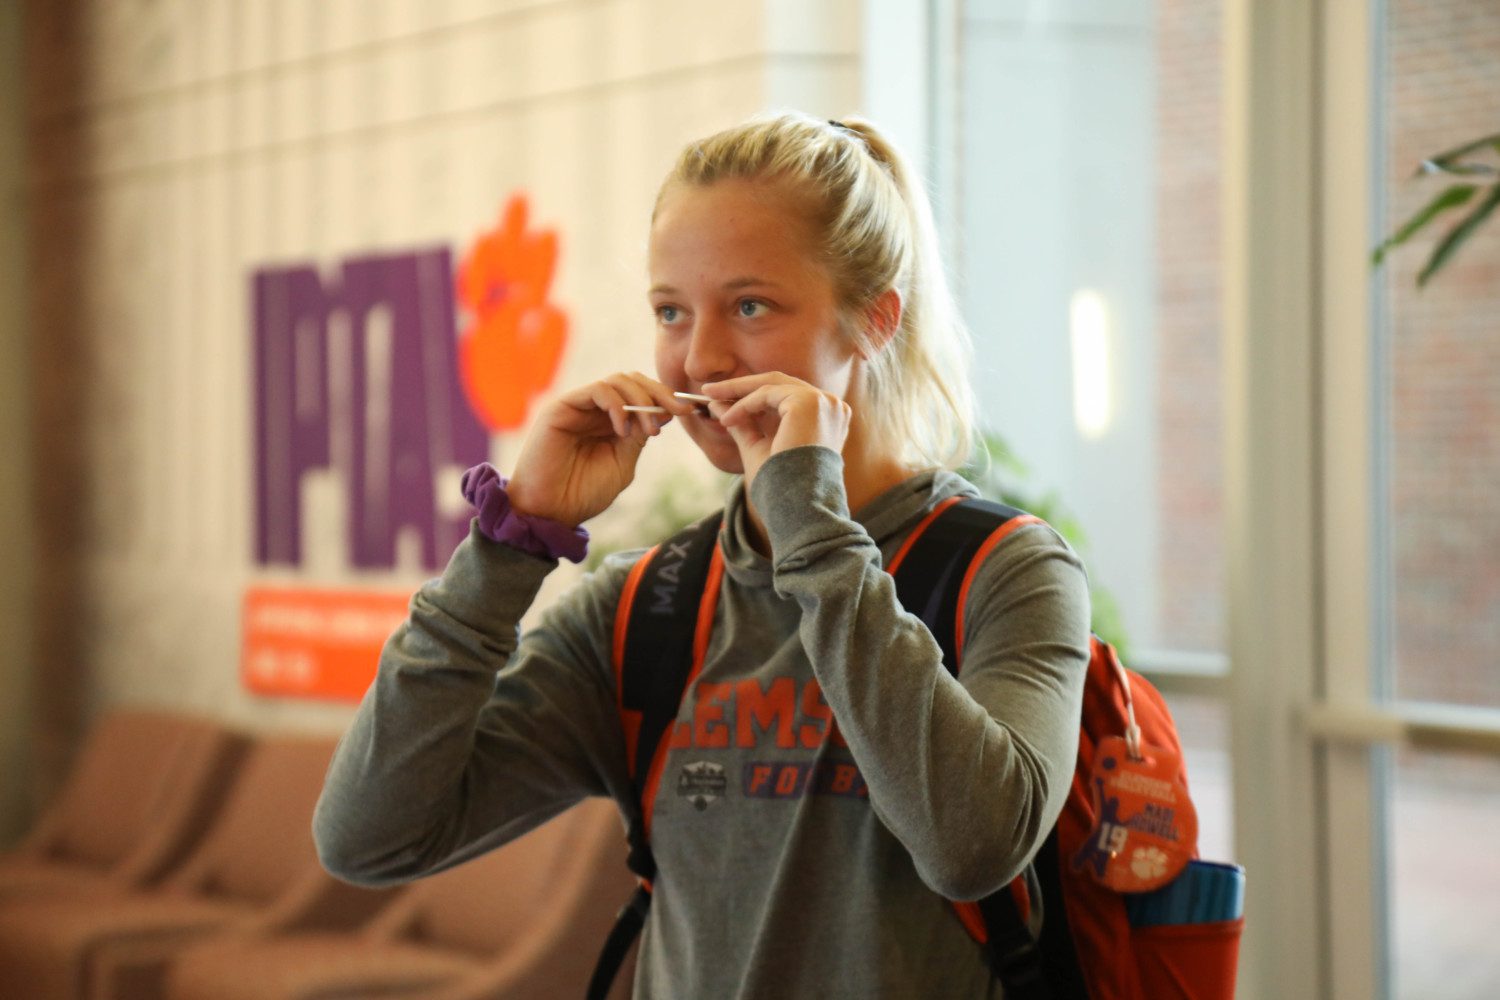 Madi Howell of Clemson volleyball swabbing her cheeks to be added to the Project Life global bone marrow registry